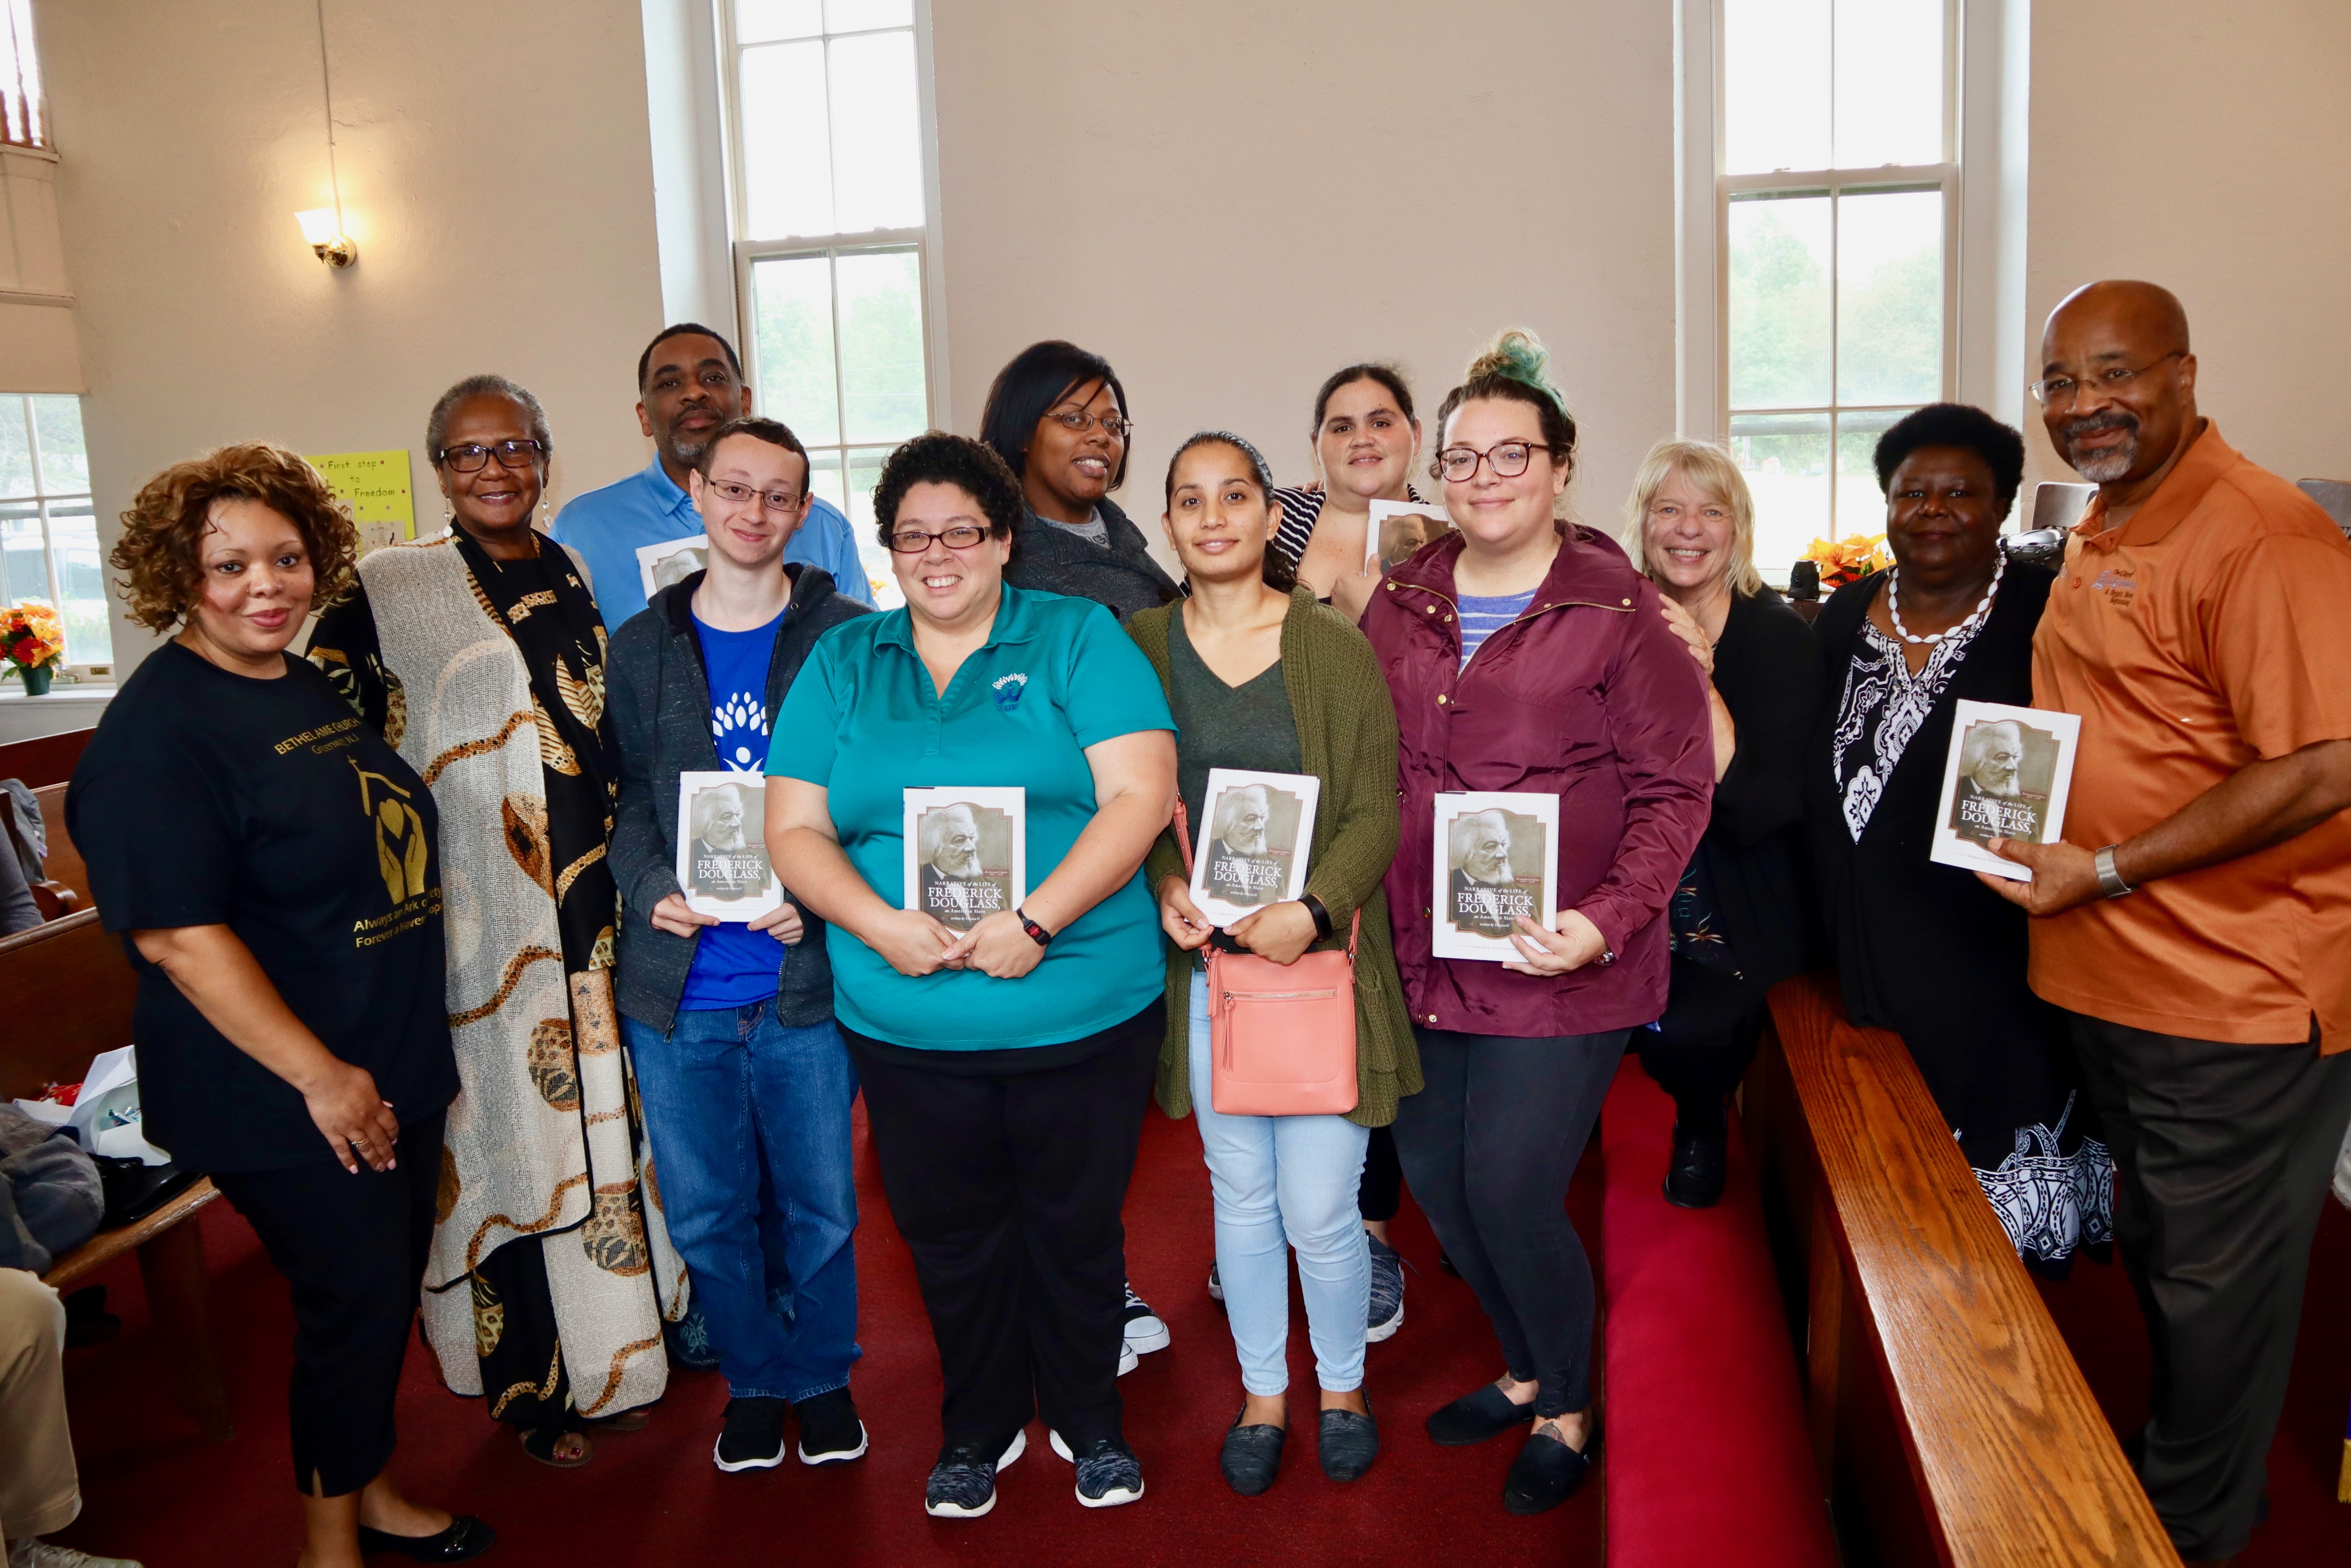 The Willits Book Trust Committee presents Books to Cumberland County Students in partnership  with the Frederick Douglass Family Initiatives